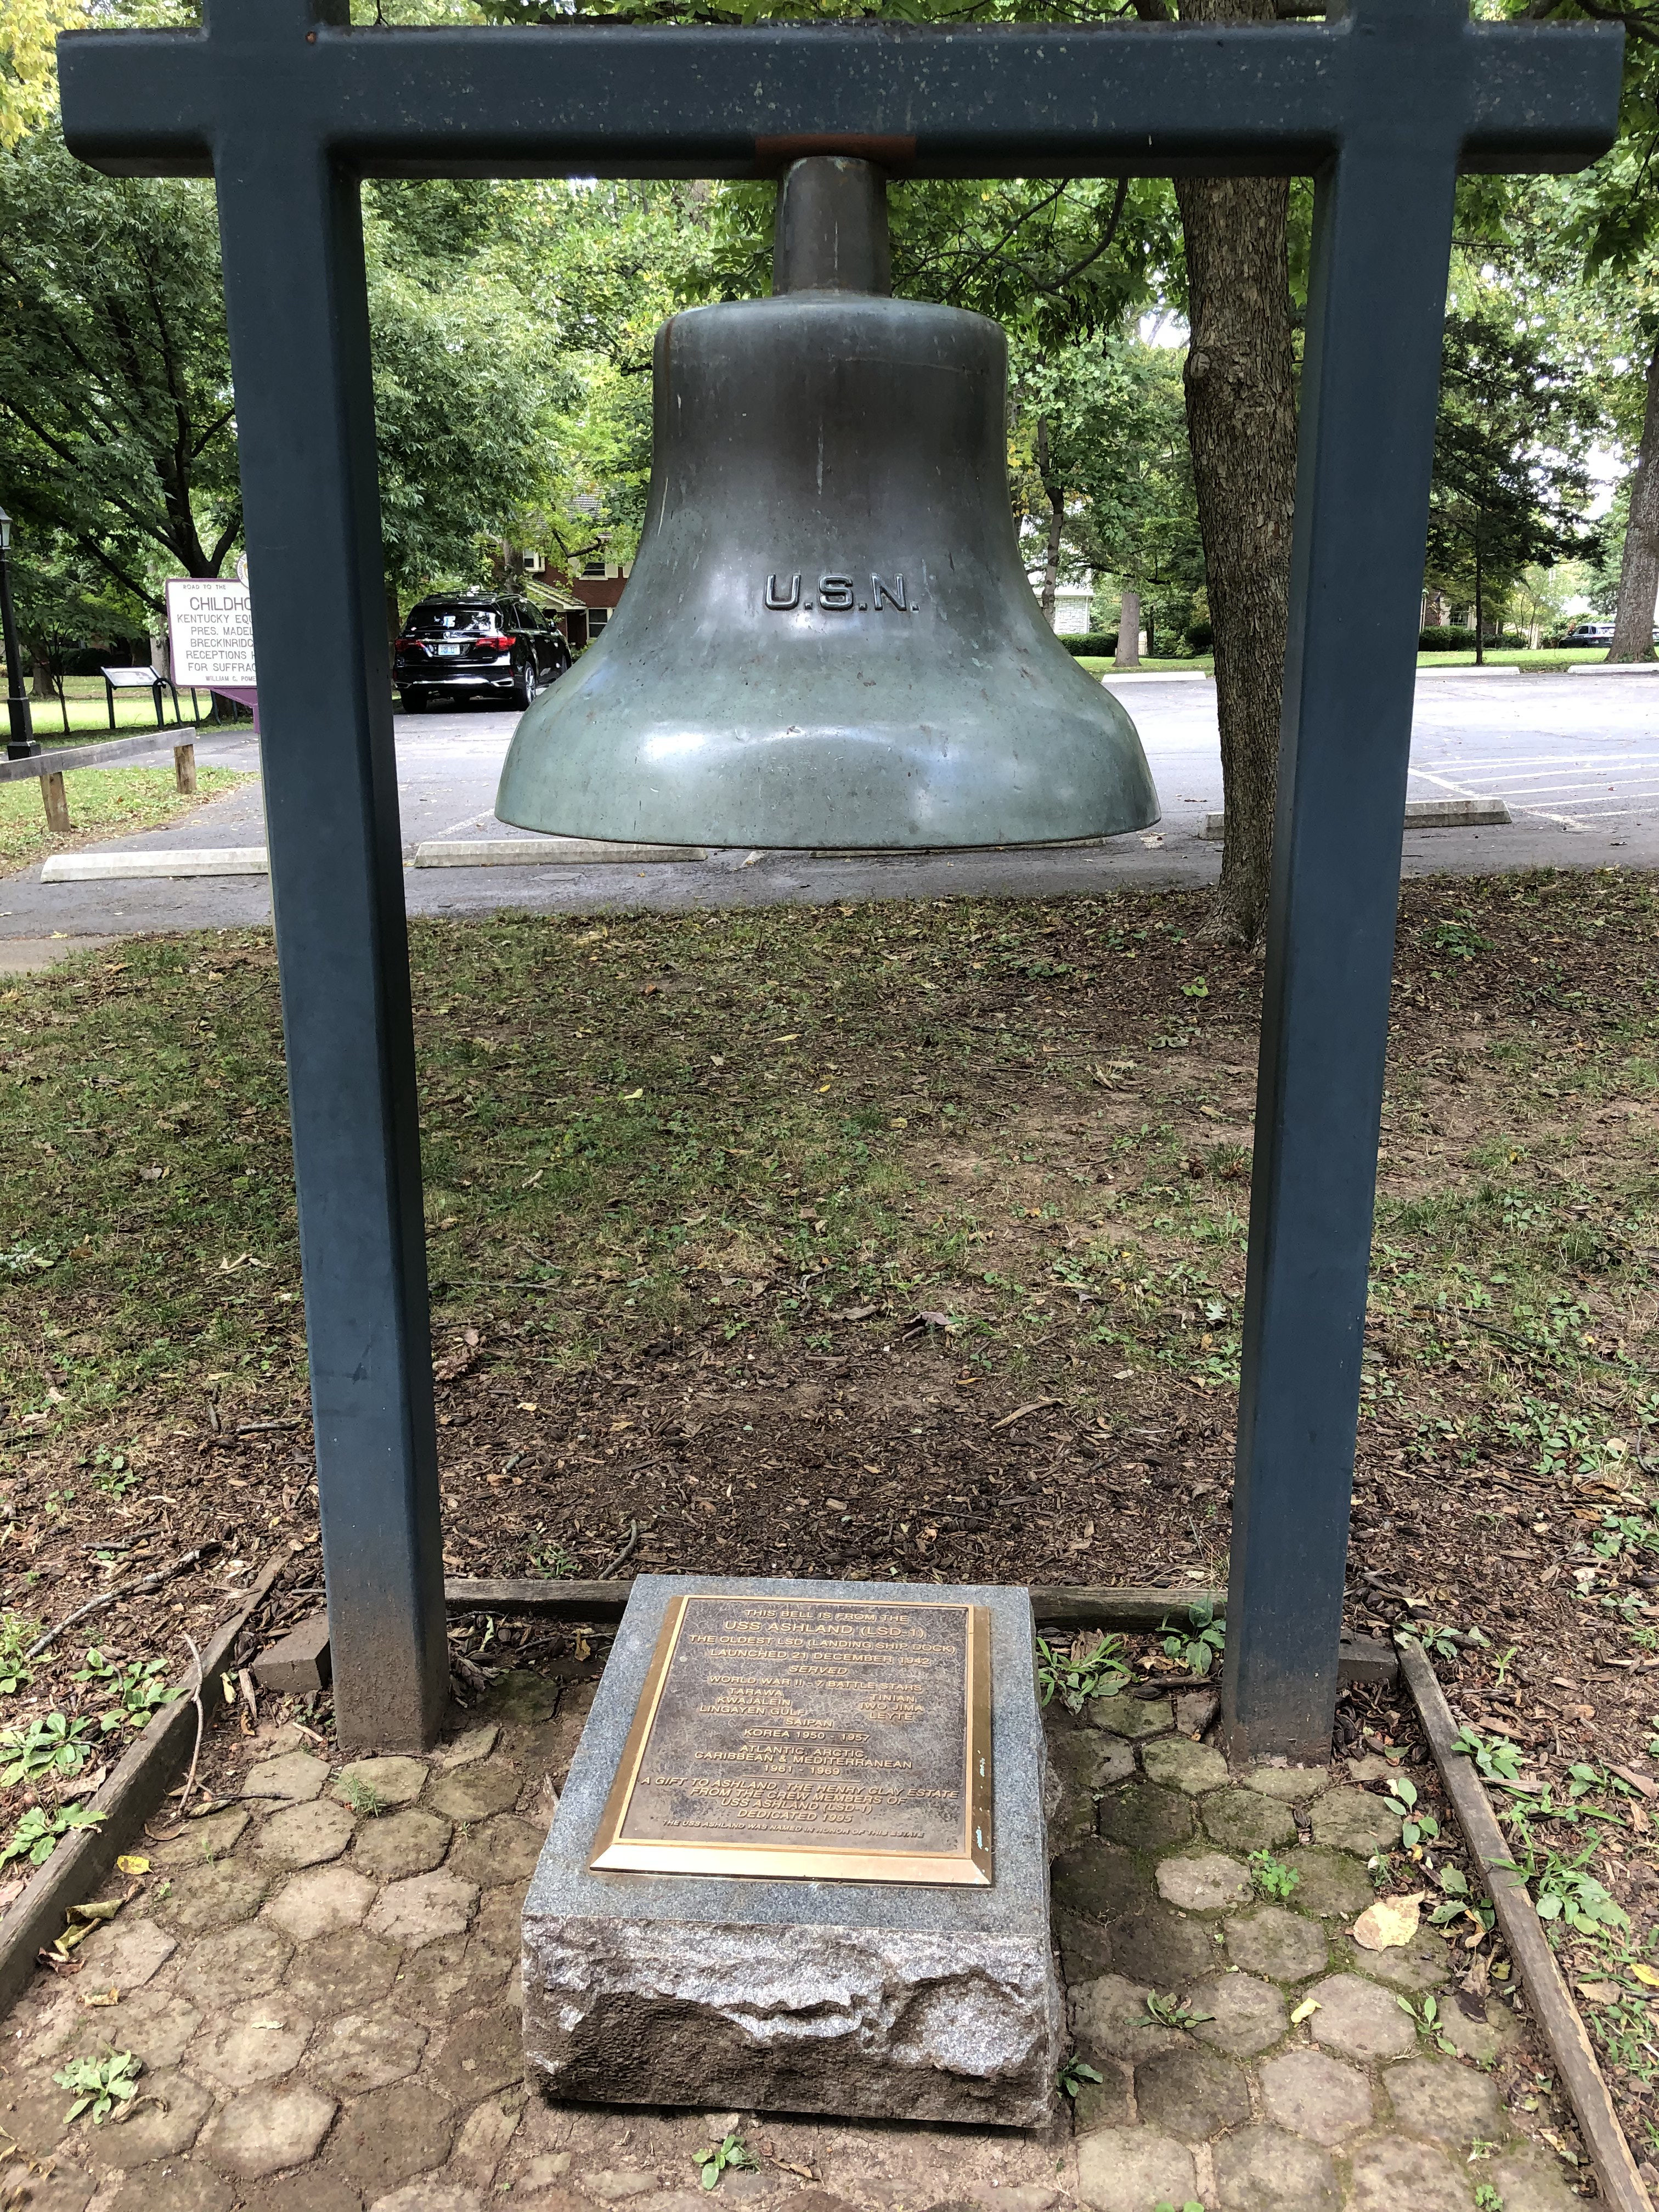 The bell from the original USS Ashland